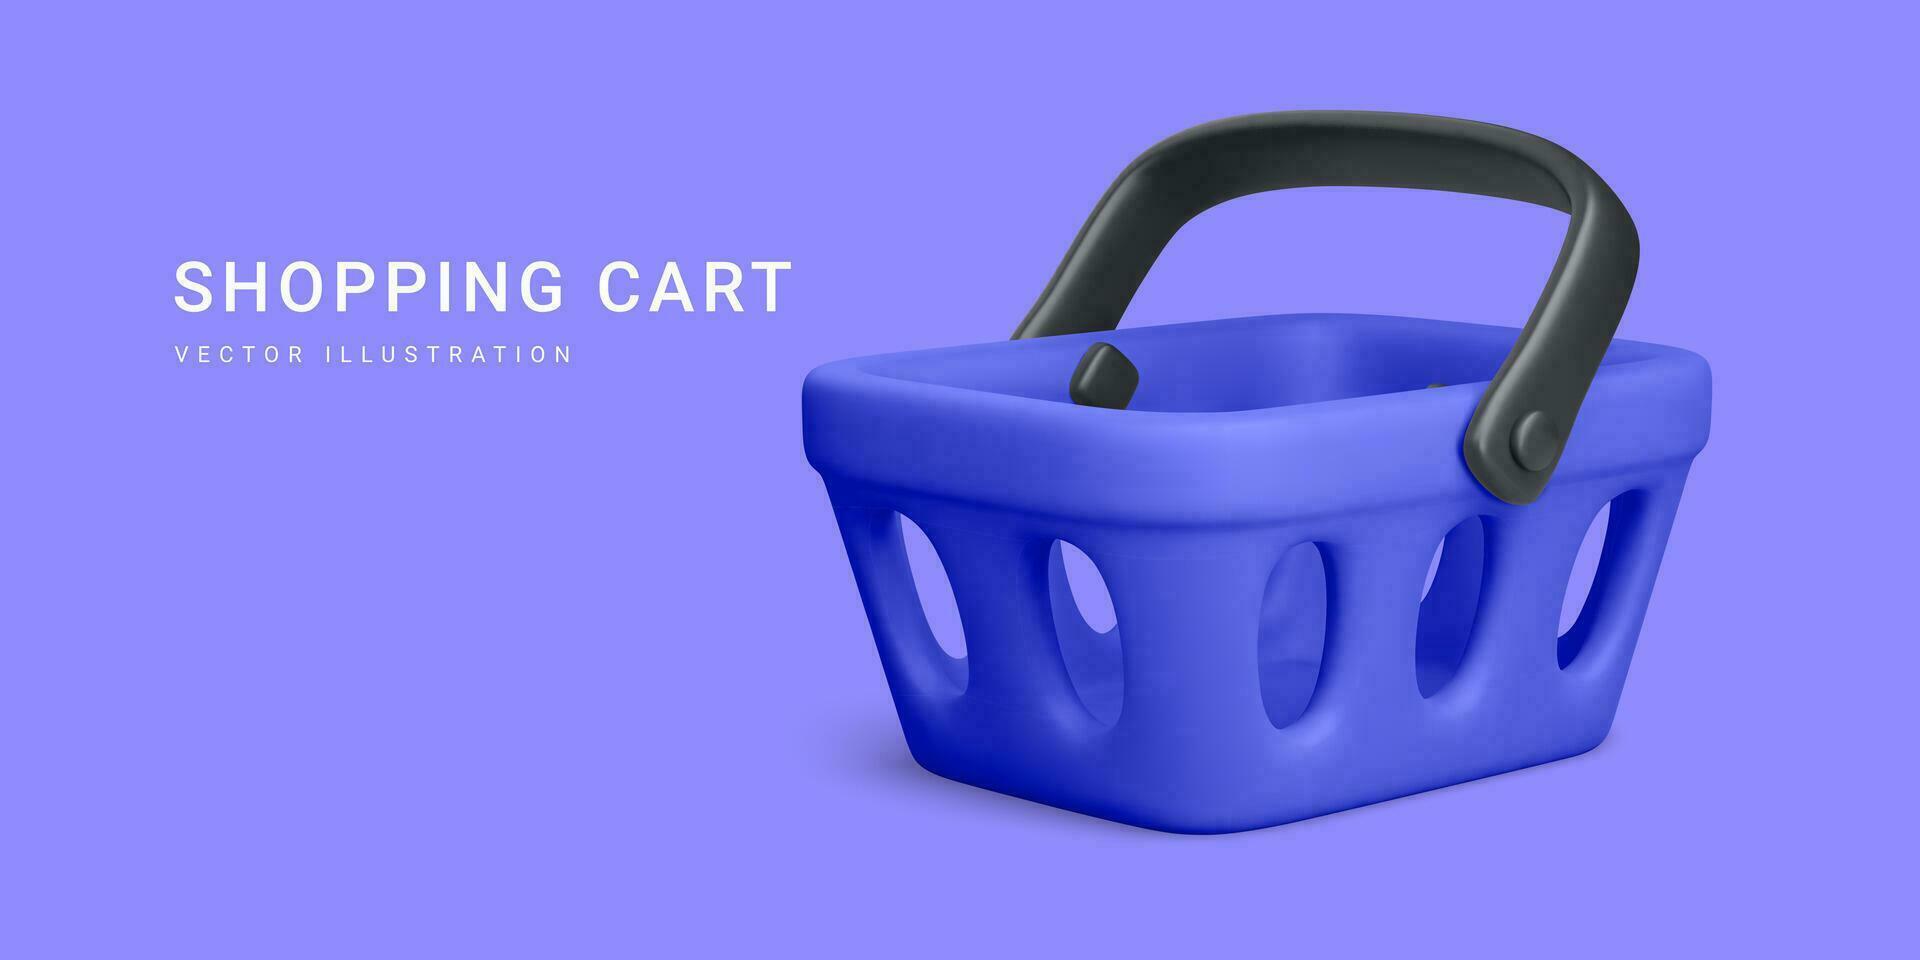 3d realistic blue plastic shopping cart isolated on light background. Vector illustration